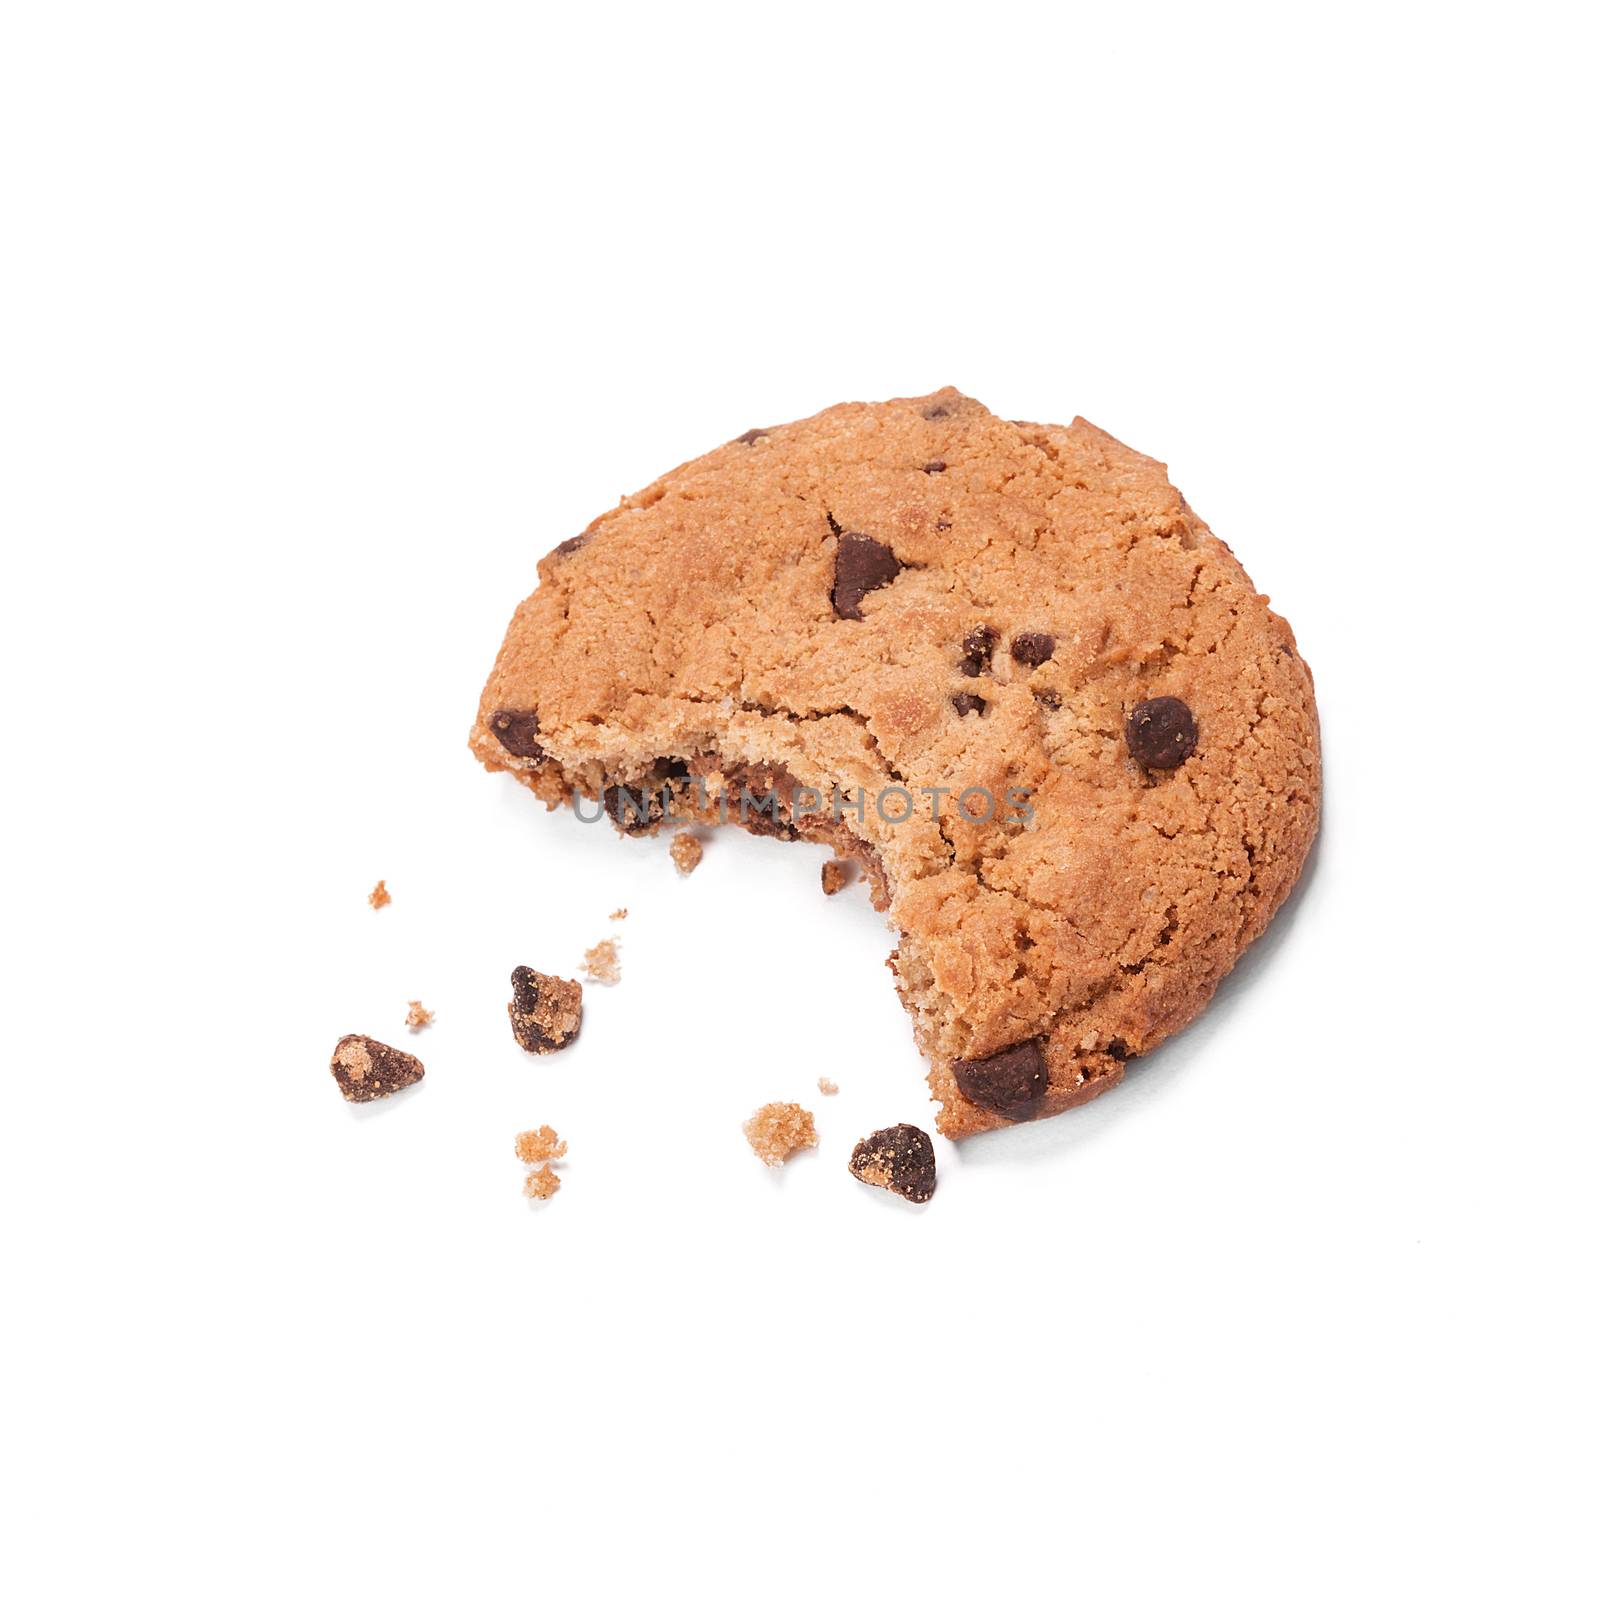 Single round chocolate chip biscuit with crumbs and bite missing, isolated on white from above. by ivo_13